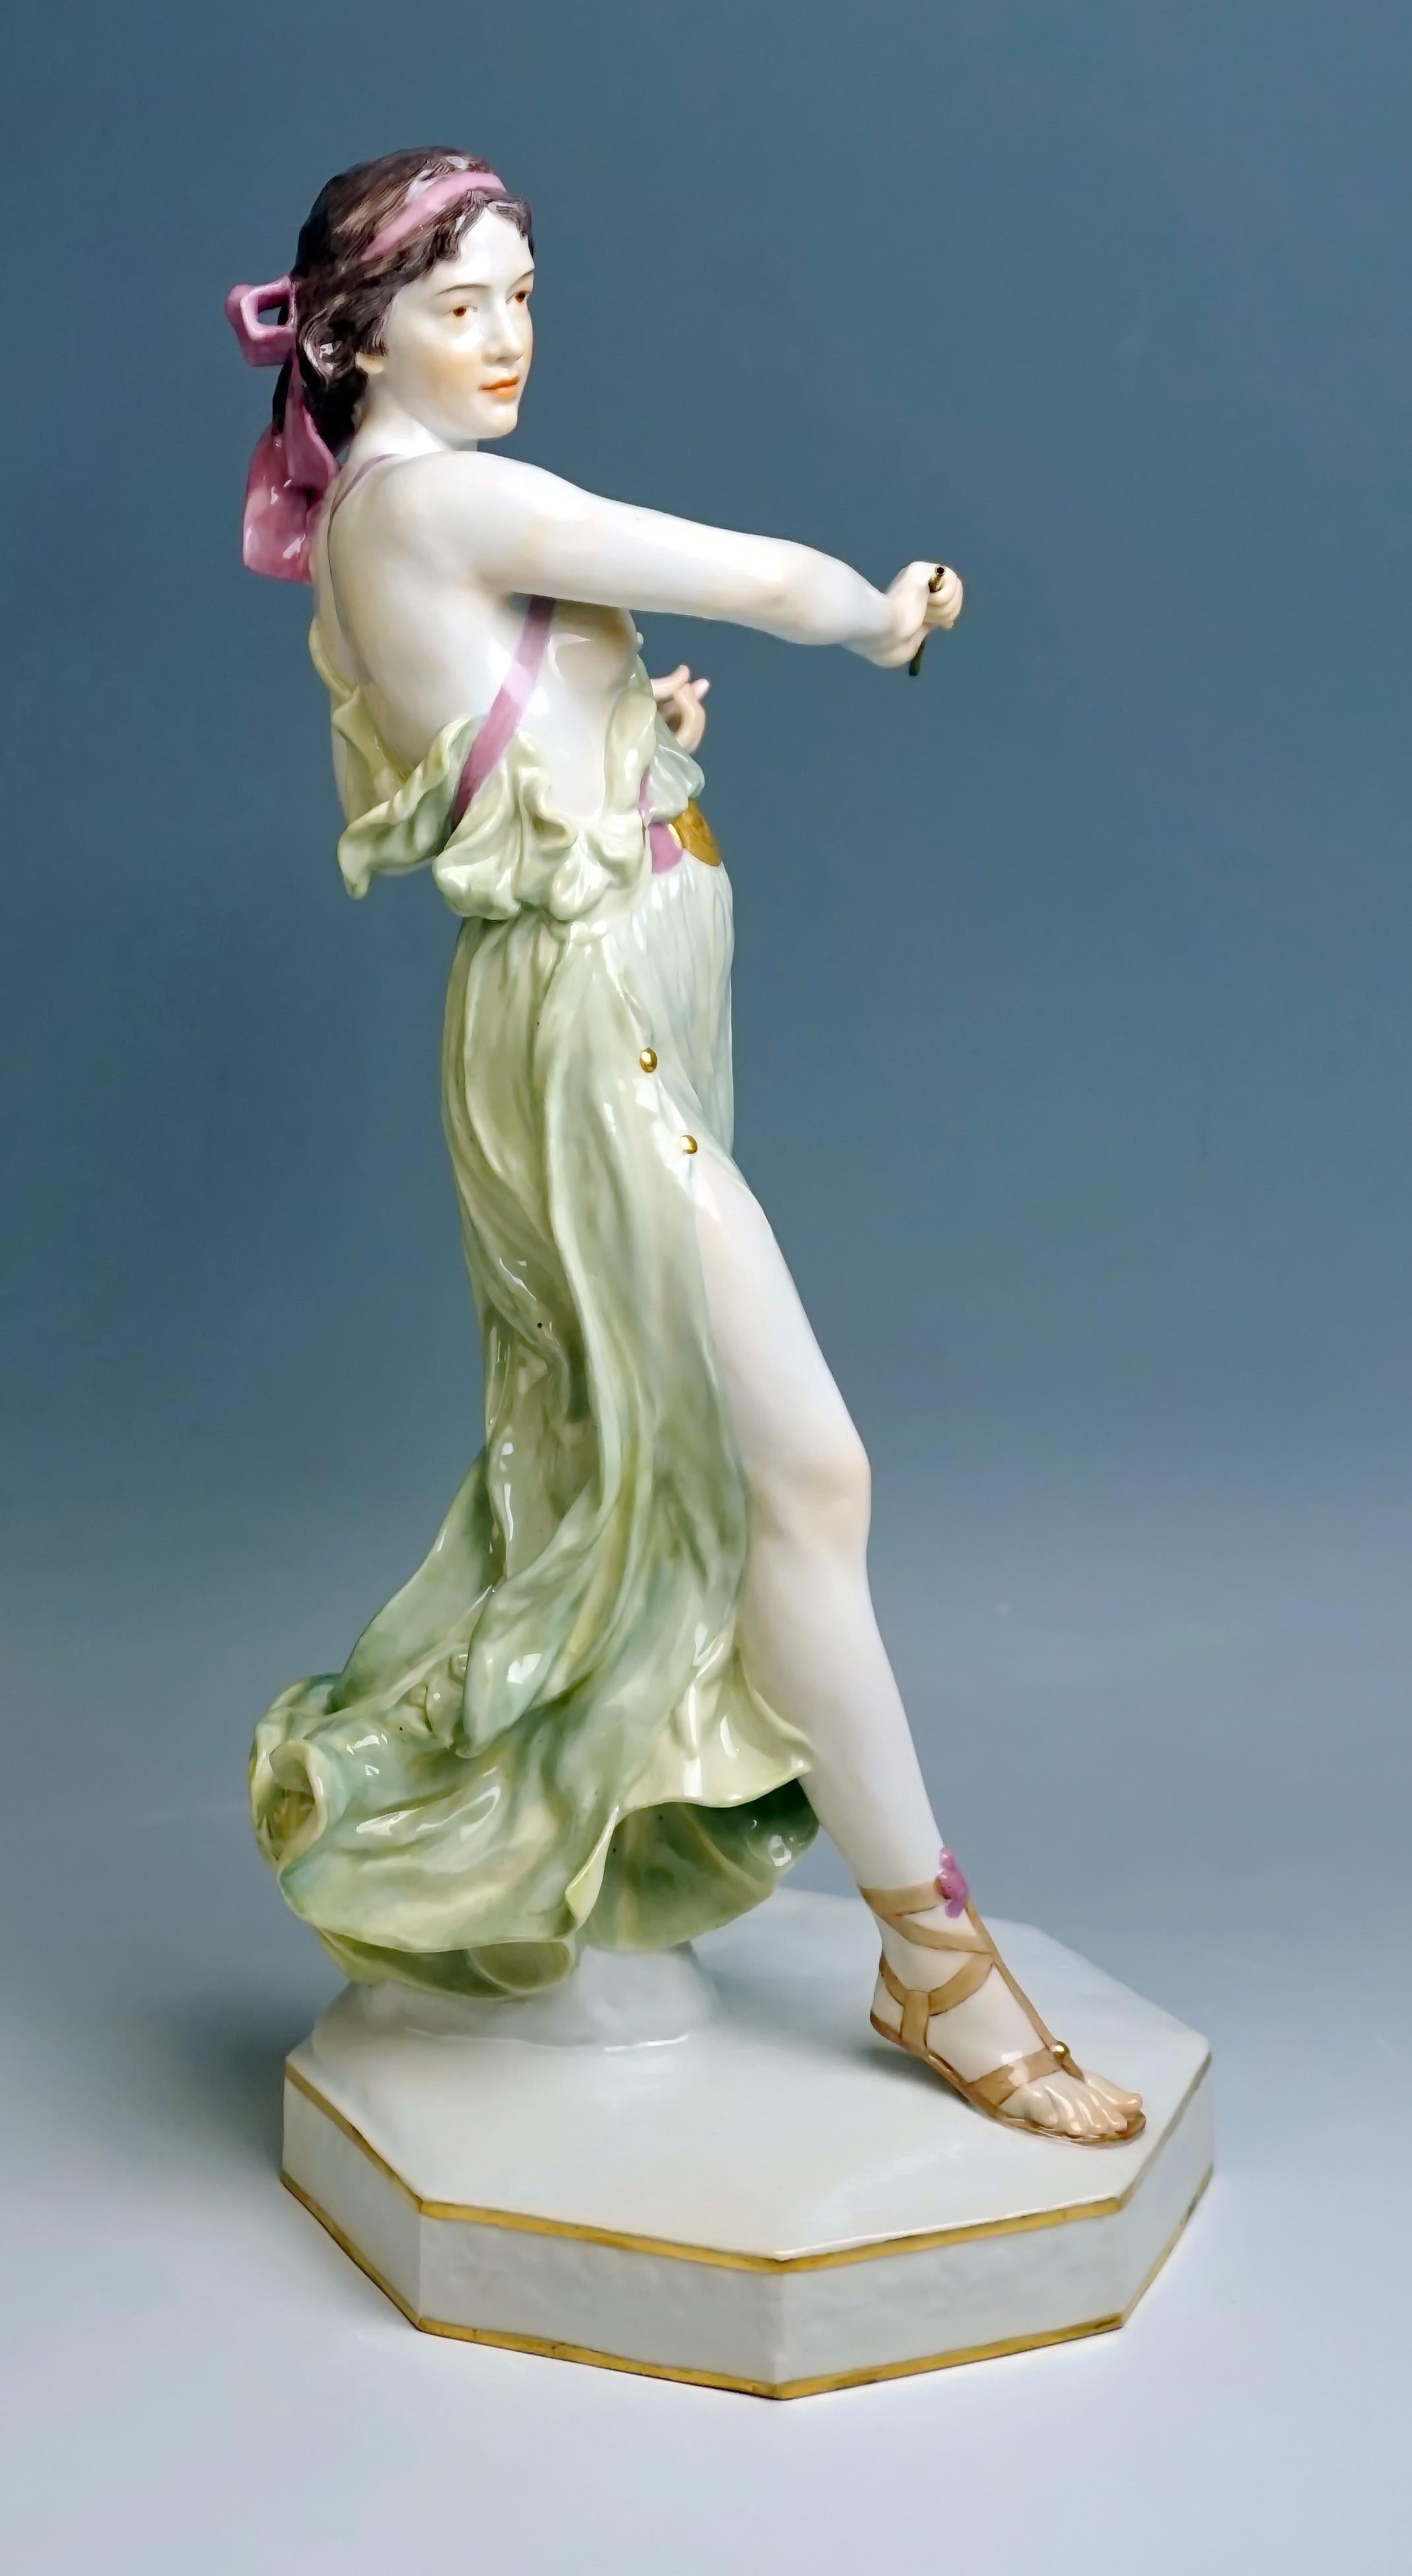 Hand-Crafted Meissen Art Nouveau Figurine Young Lady Ring Thrower by Reinhold Boeltzig 1909